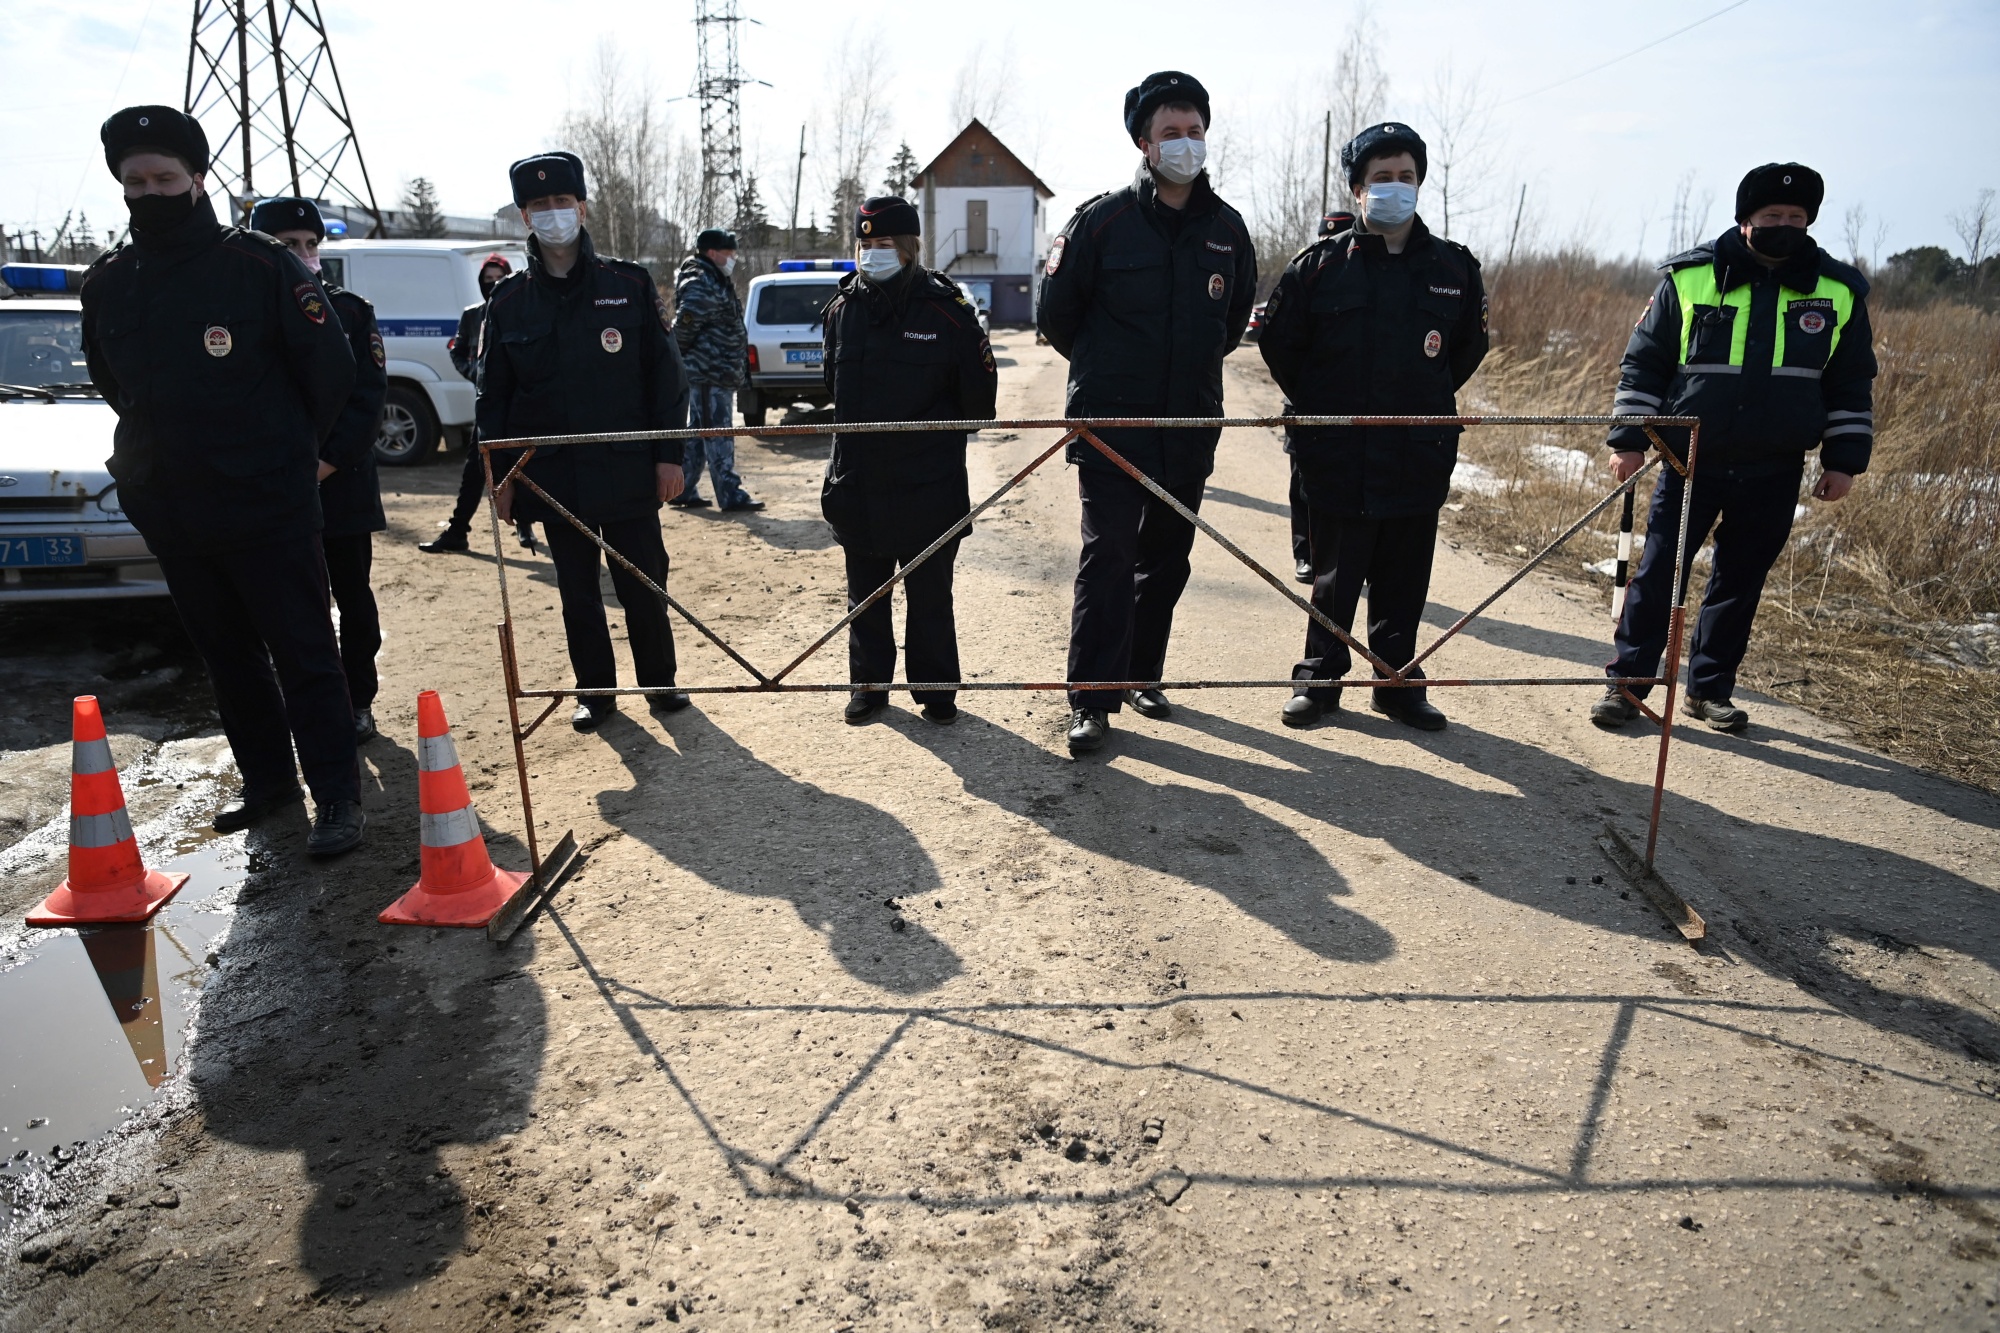 Russian police officers guard the entrance to the penal colony where Alexei Navalny is serving a two-and-a-half year prison term&nbsp;in Pokrov on April 6.